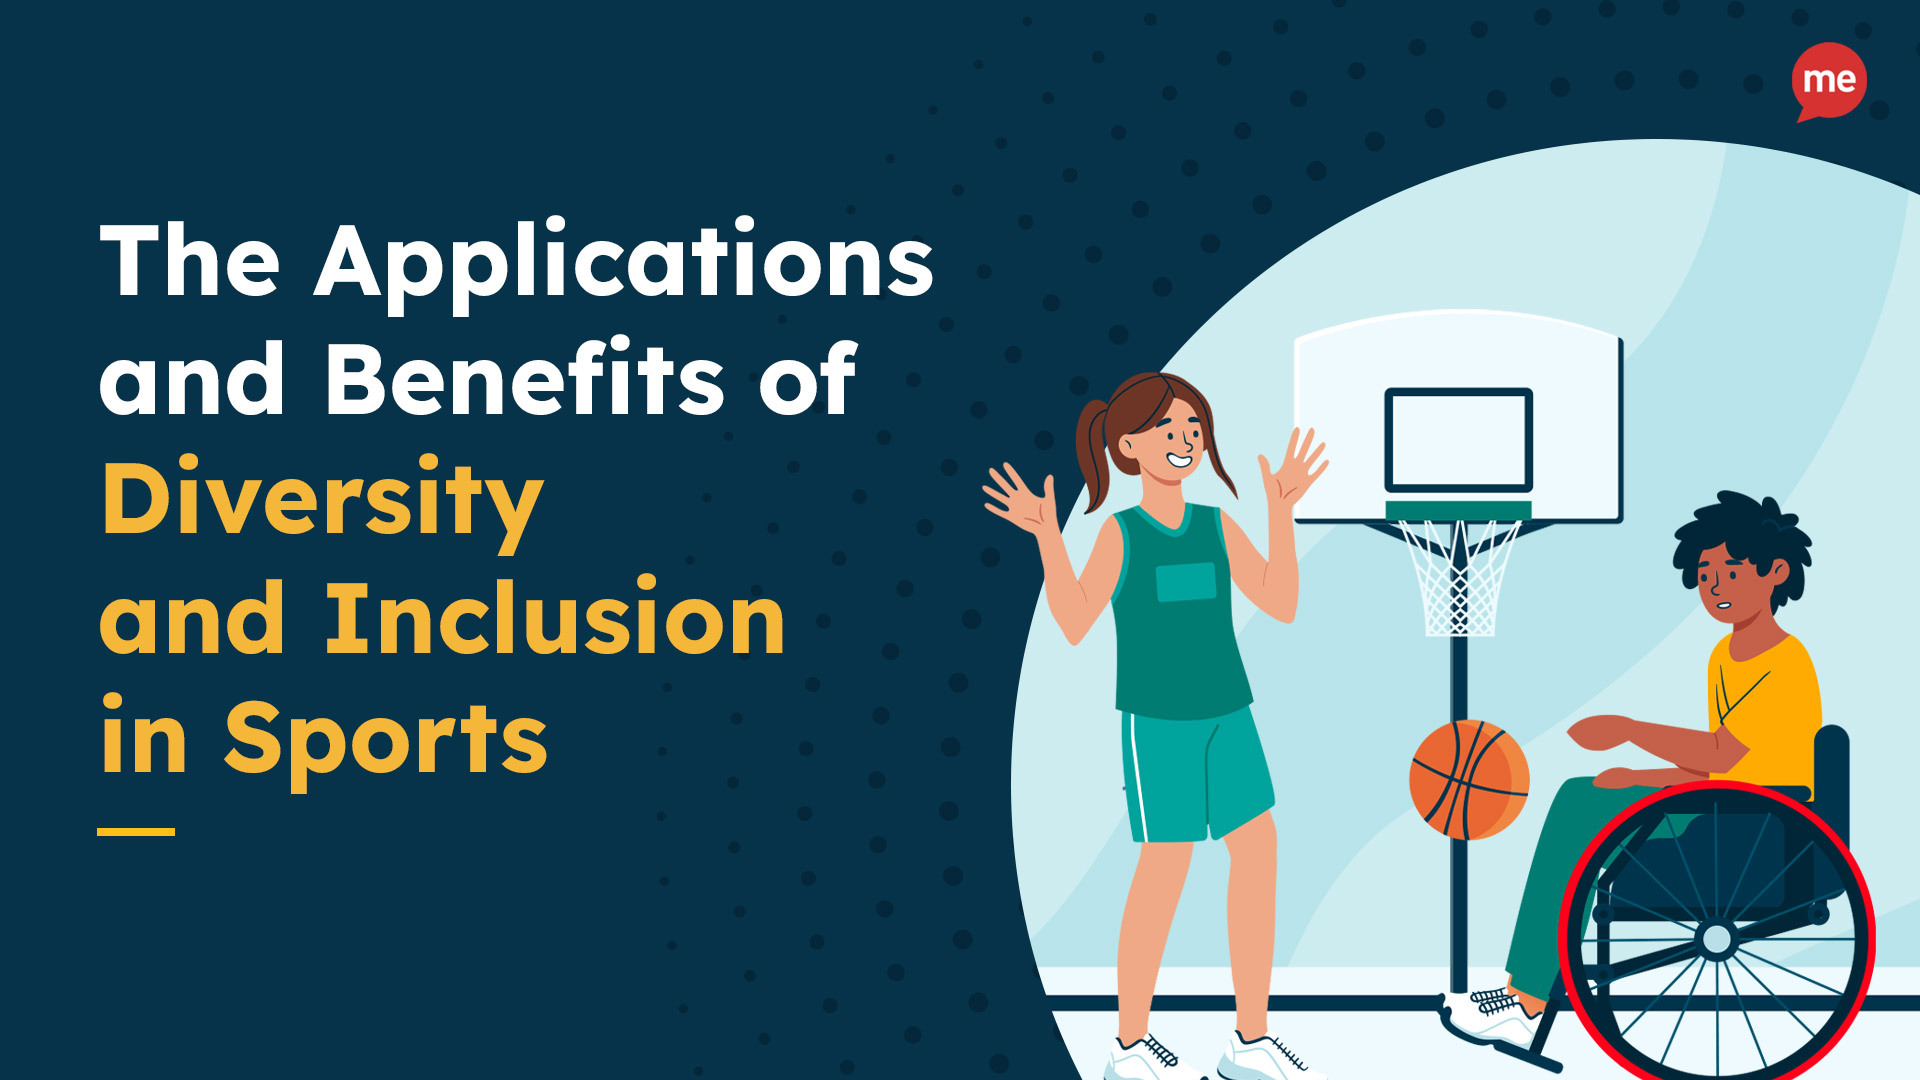 The Applications and Benefits of Diversity and Inclusion in Sports